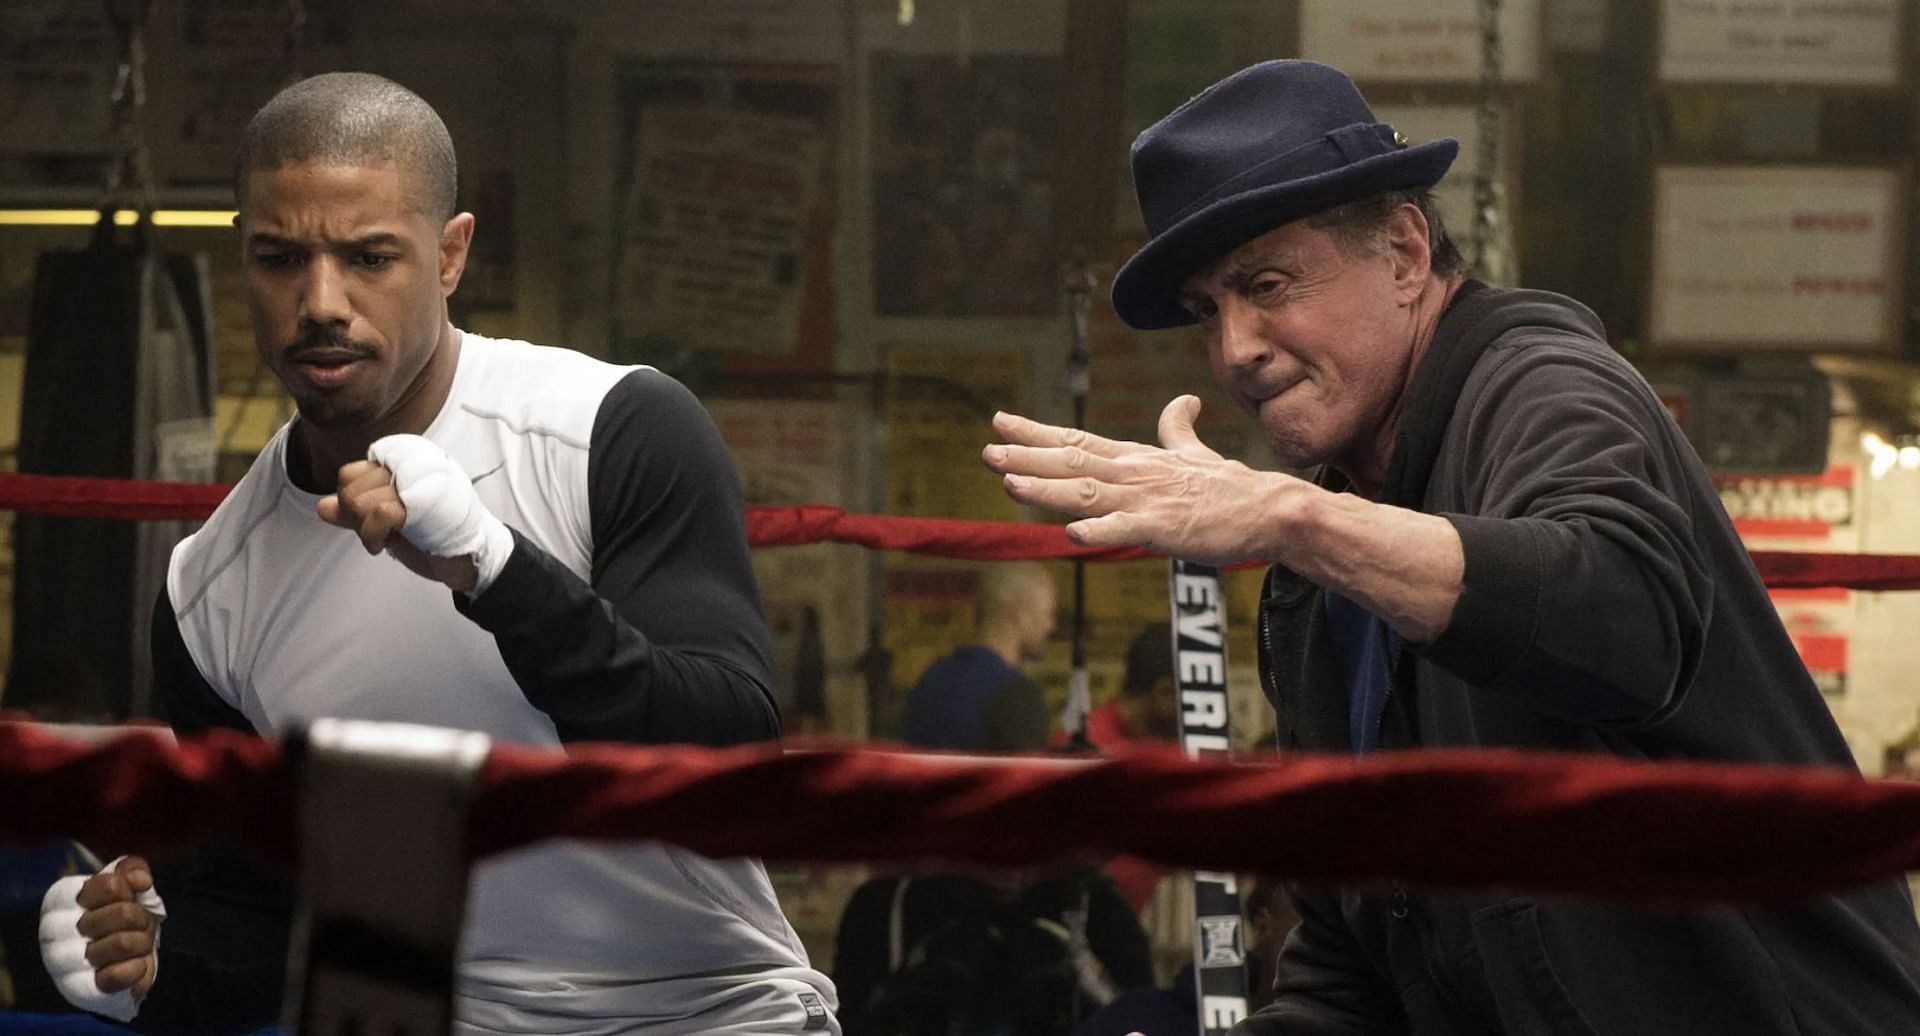 Exploring the End of an Era: The reasons behind Sylvester Stallone